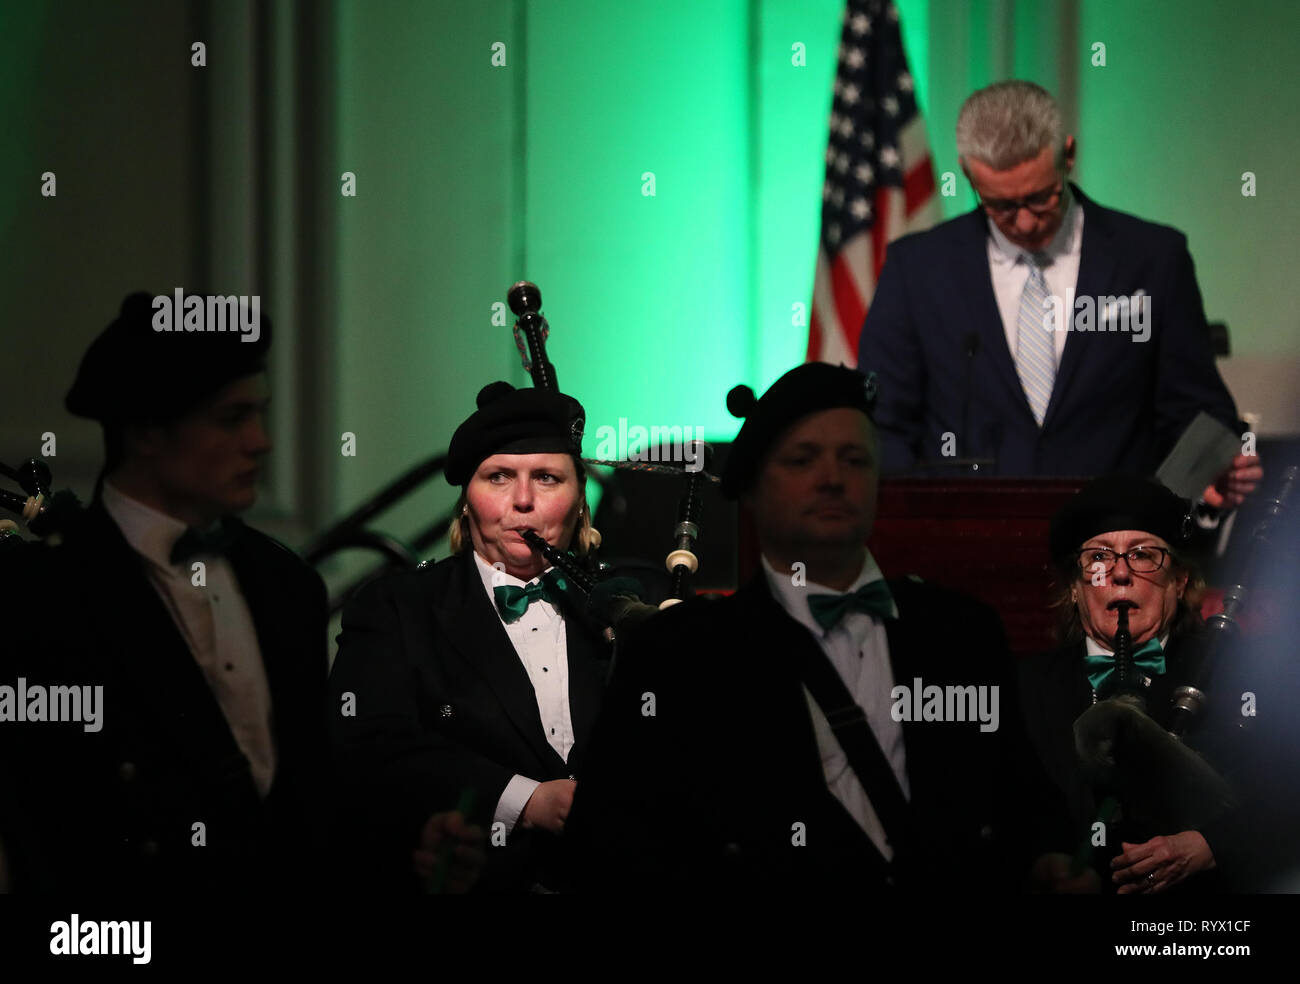 Pipers play at the Irish Fellowship Club Annual SPD Dinner at the Hilton Hotel, Chicago, during Taoiseach Leo Varadkar's visit to the United States. Stock Photo